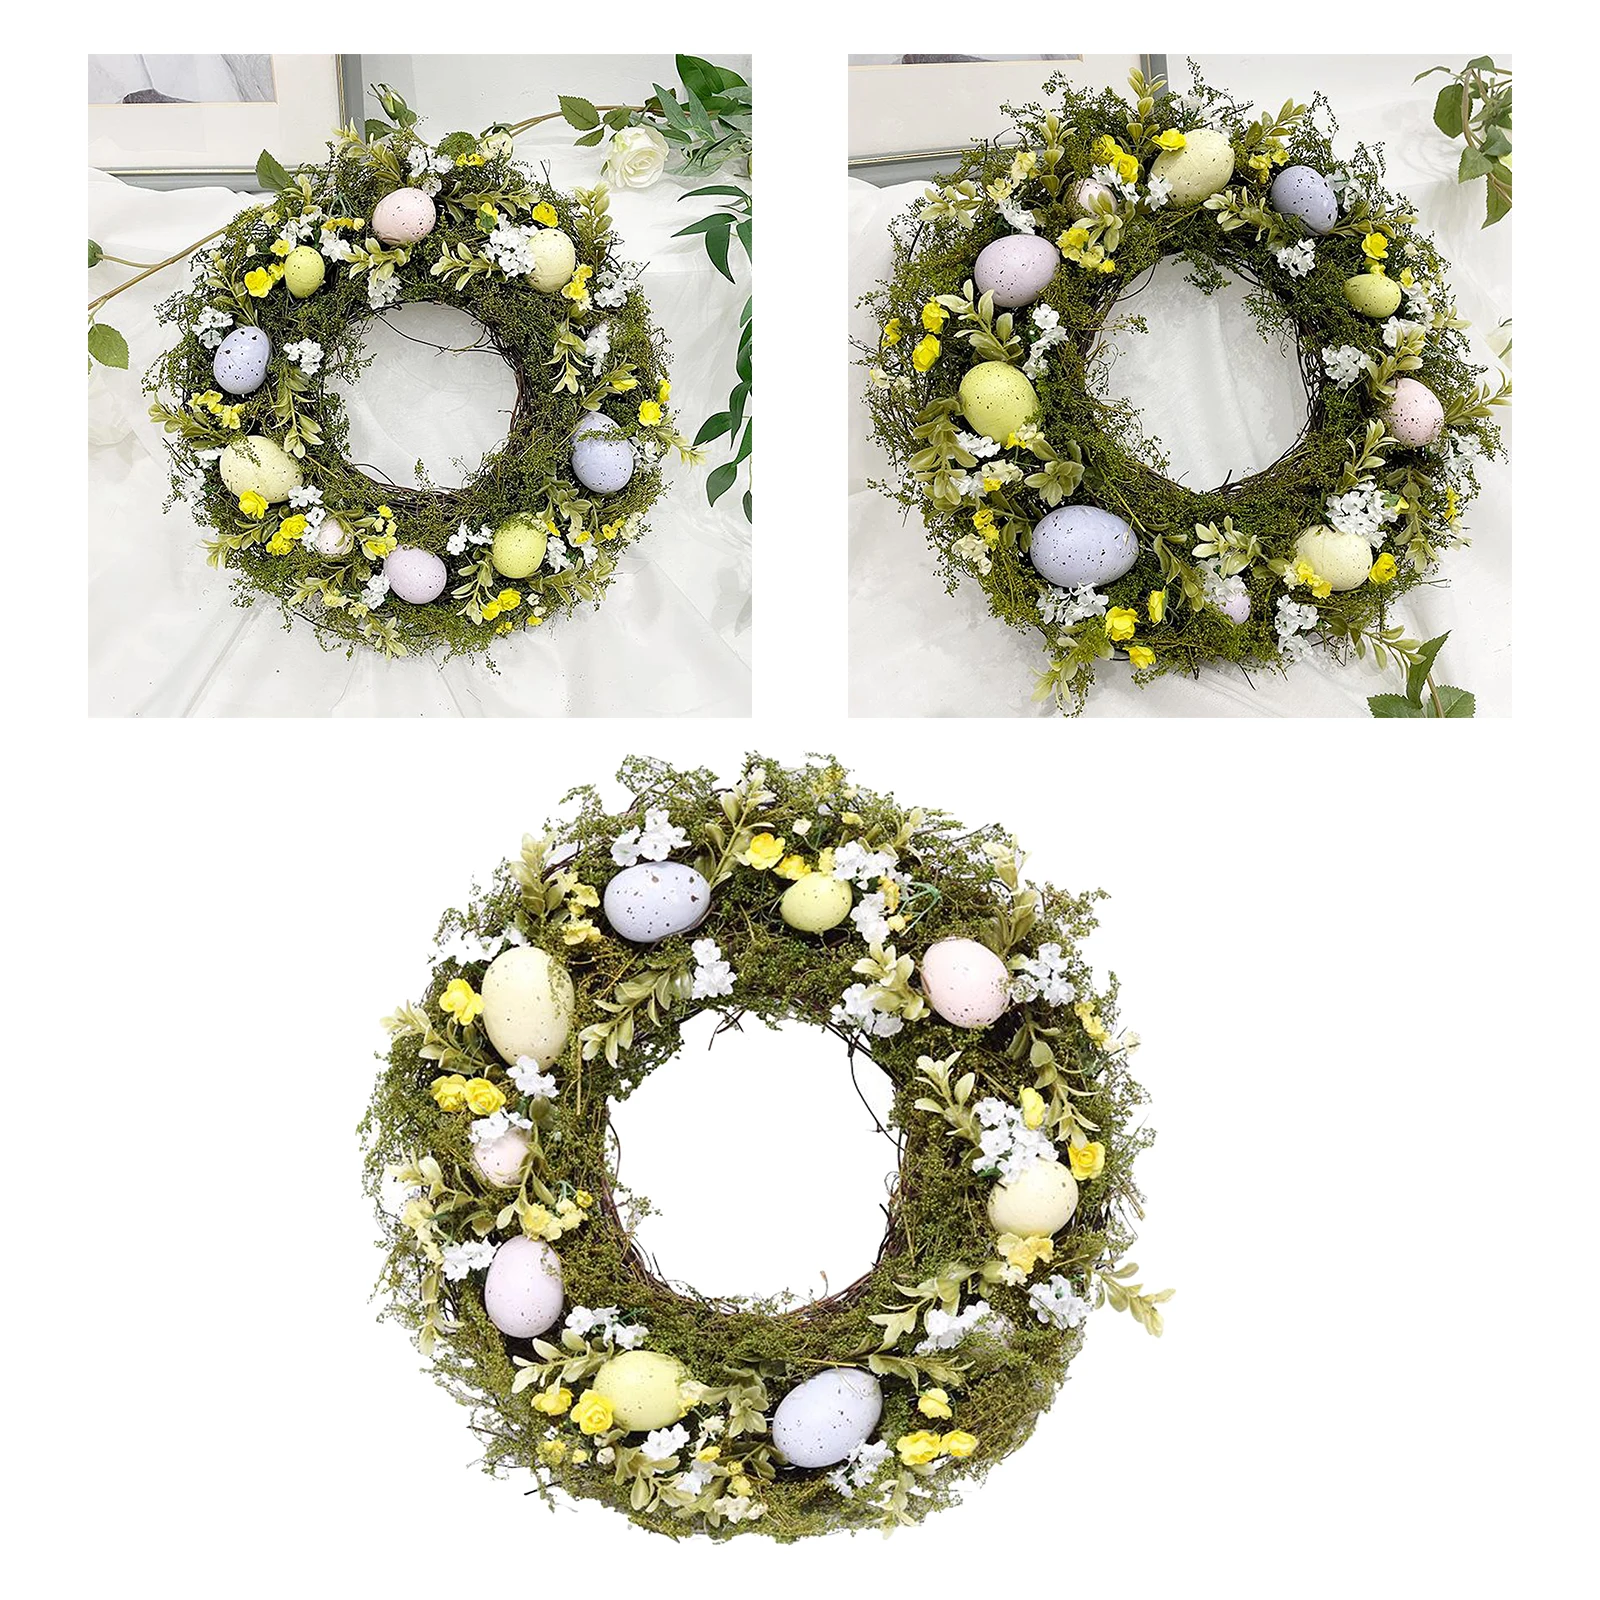 

Handmade Easter Egg Wreath 35cm Rattan Green Leaves Artificial Plants Garland ing Wedding Party Holiday Decor Pendant